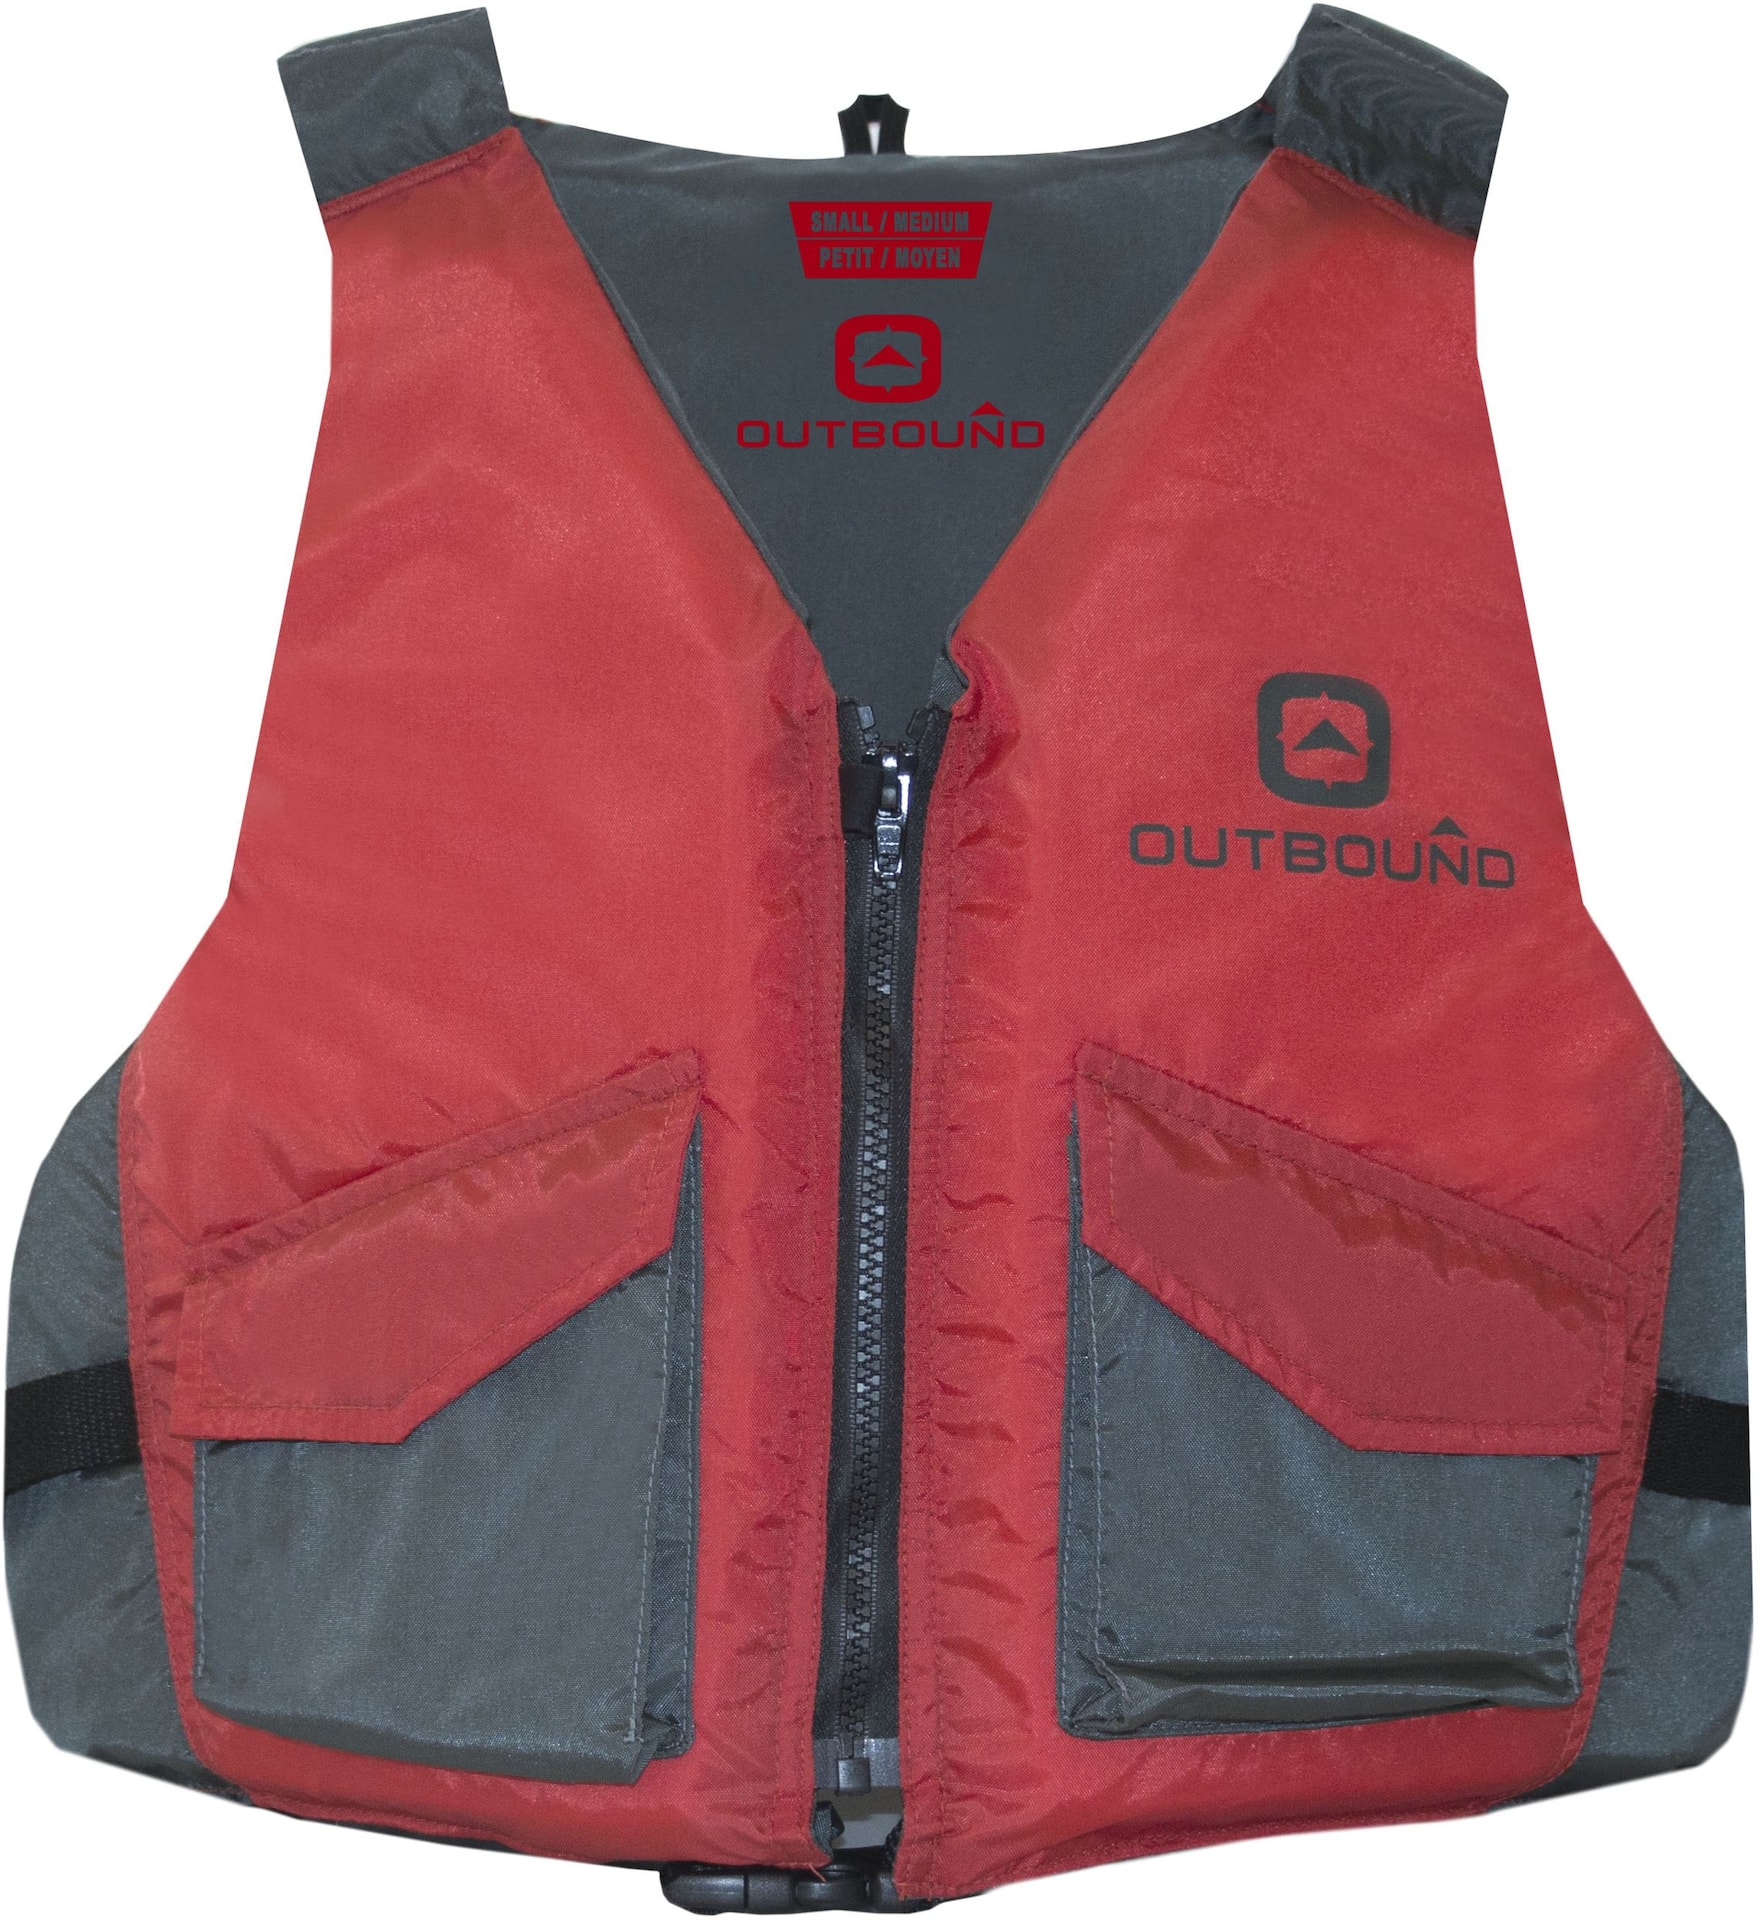 https://media-www.canadiantire.ca/product/playing/seasonal-recreation/marine-water-fun/0792013/outbound-paddling-vest-small-medium-ff90075b-6ea3-4d5a-93bd-f5997276e8e4-jpgrendition.jpg